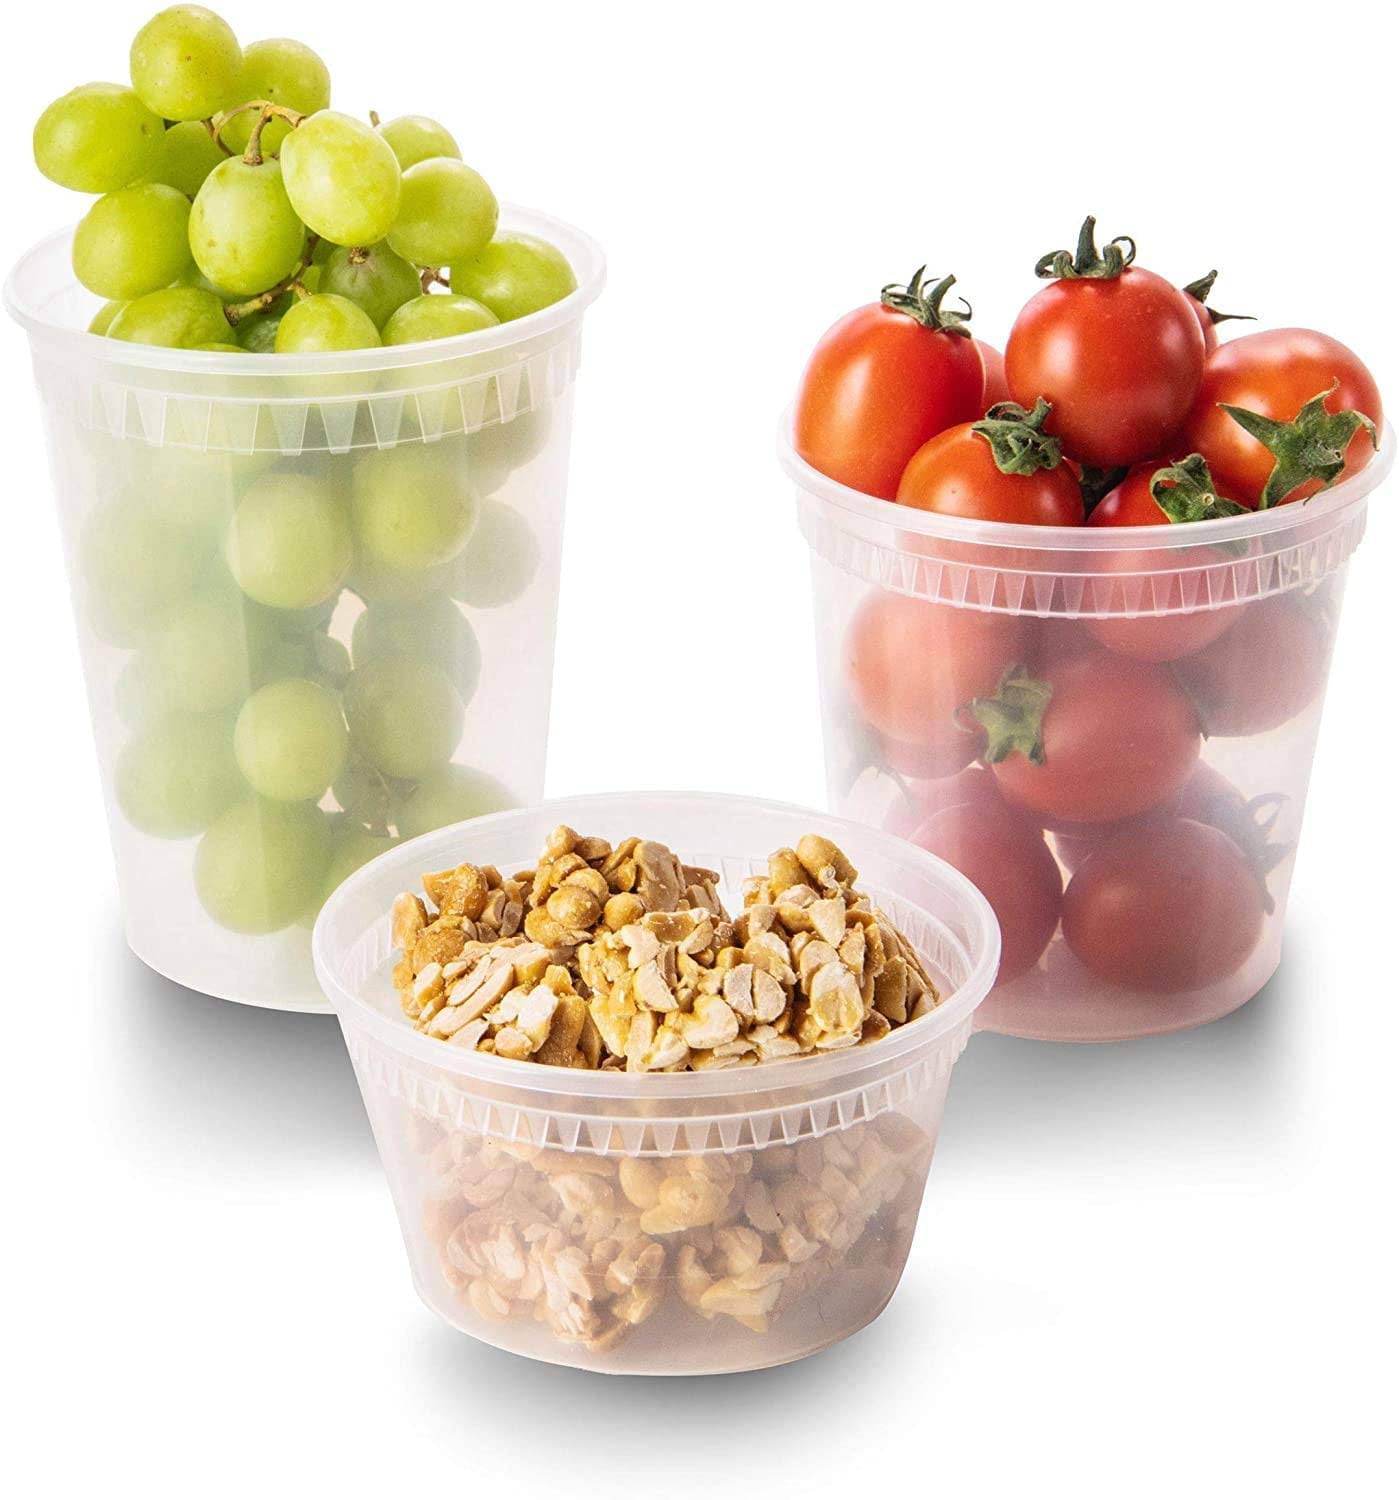 Tripak Td40016 Plastic Deli Container with Lid 16 oz (Pack of 240)